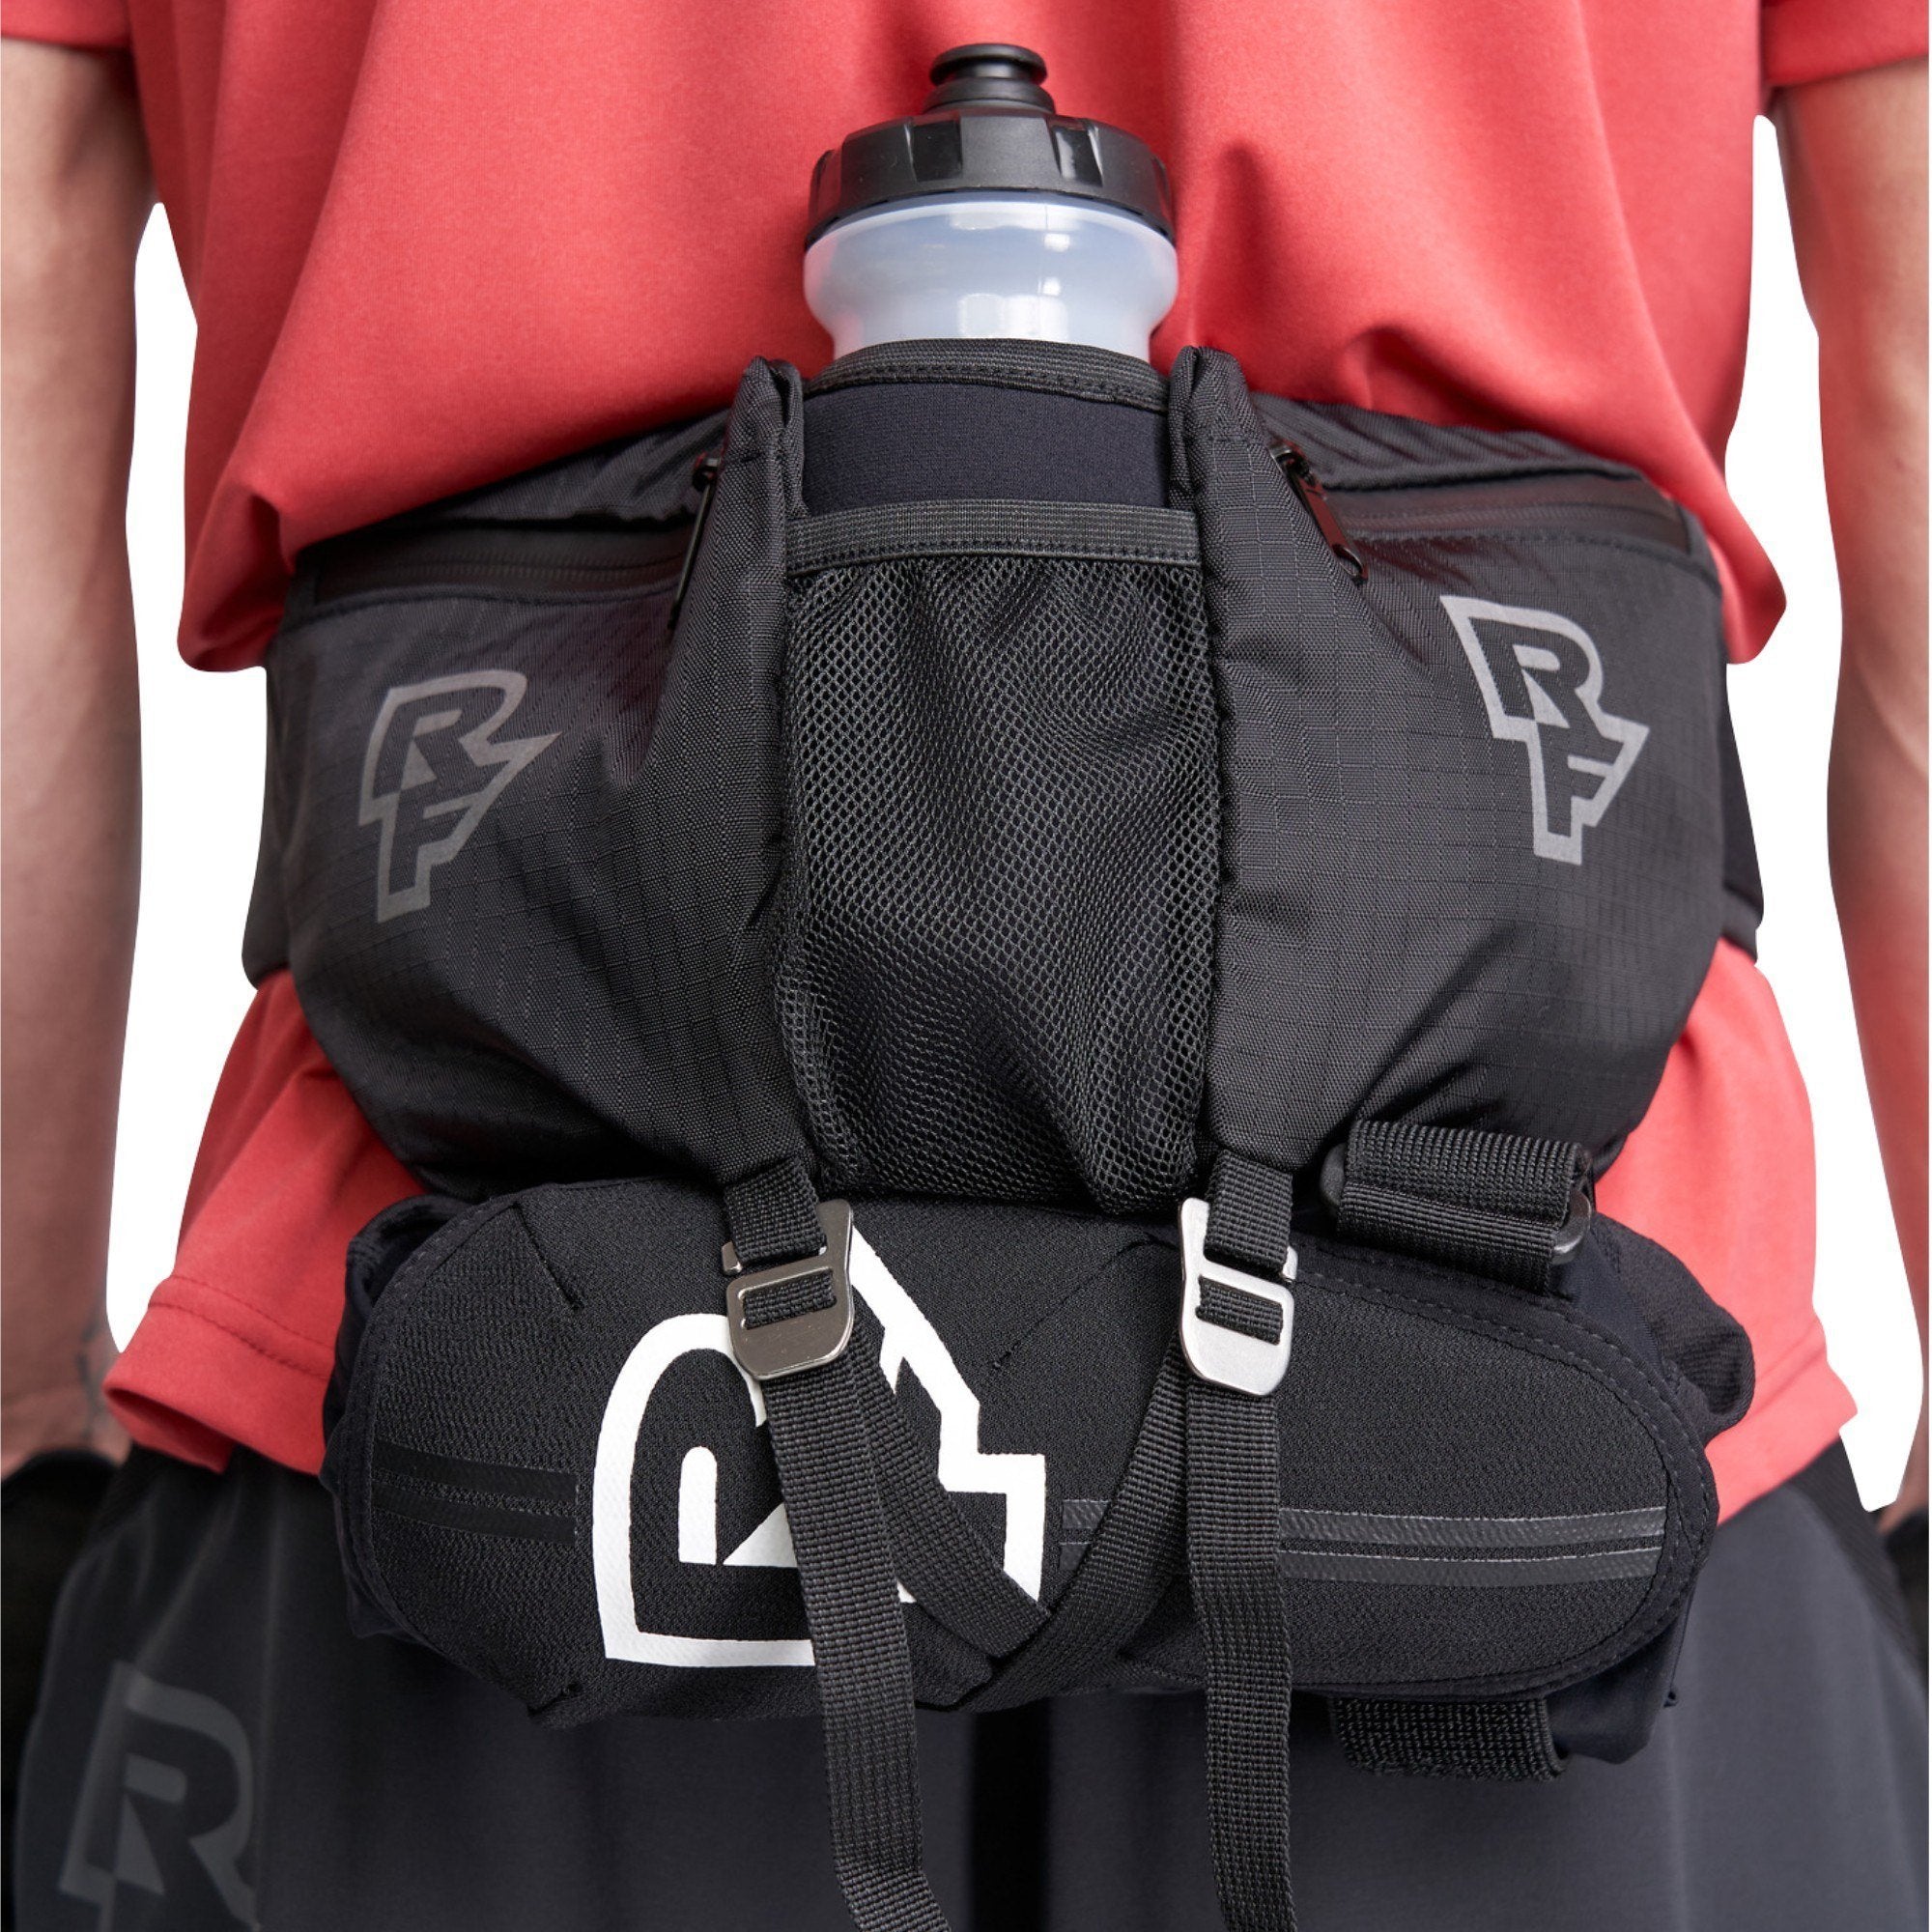 Raceface Hip Pack